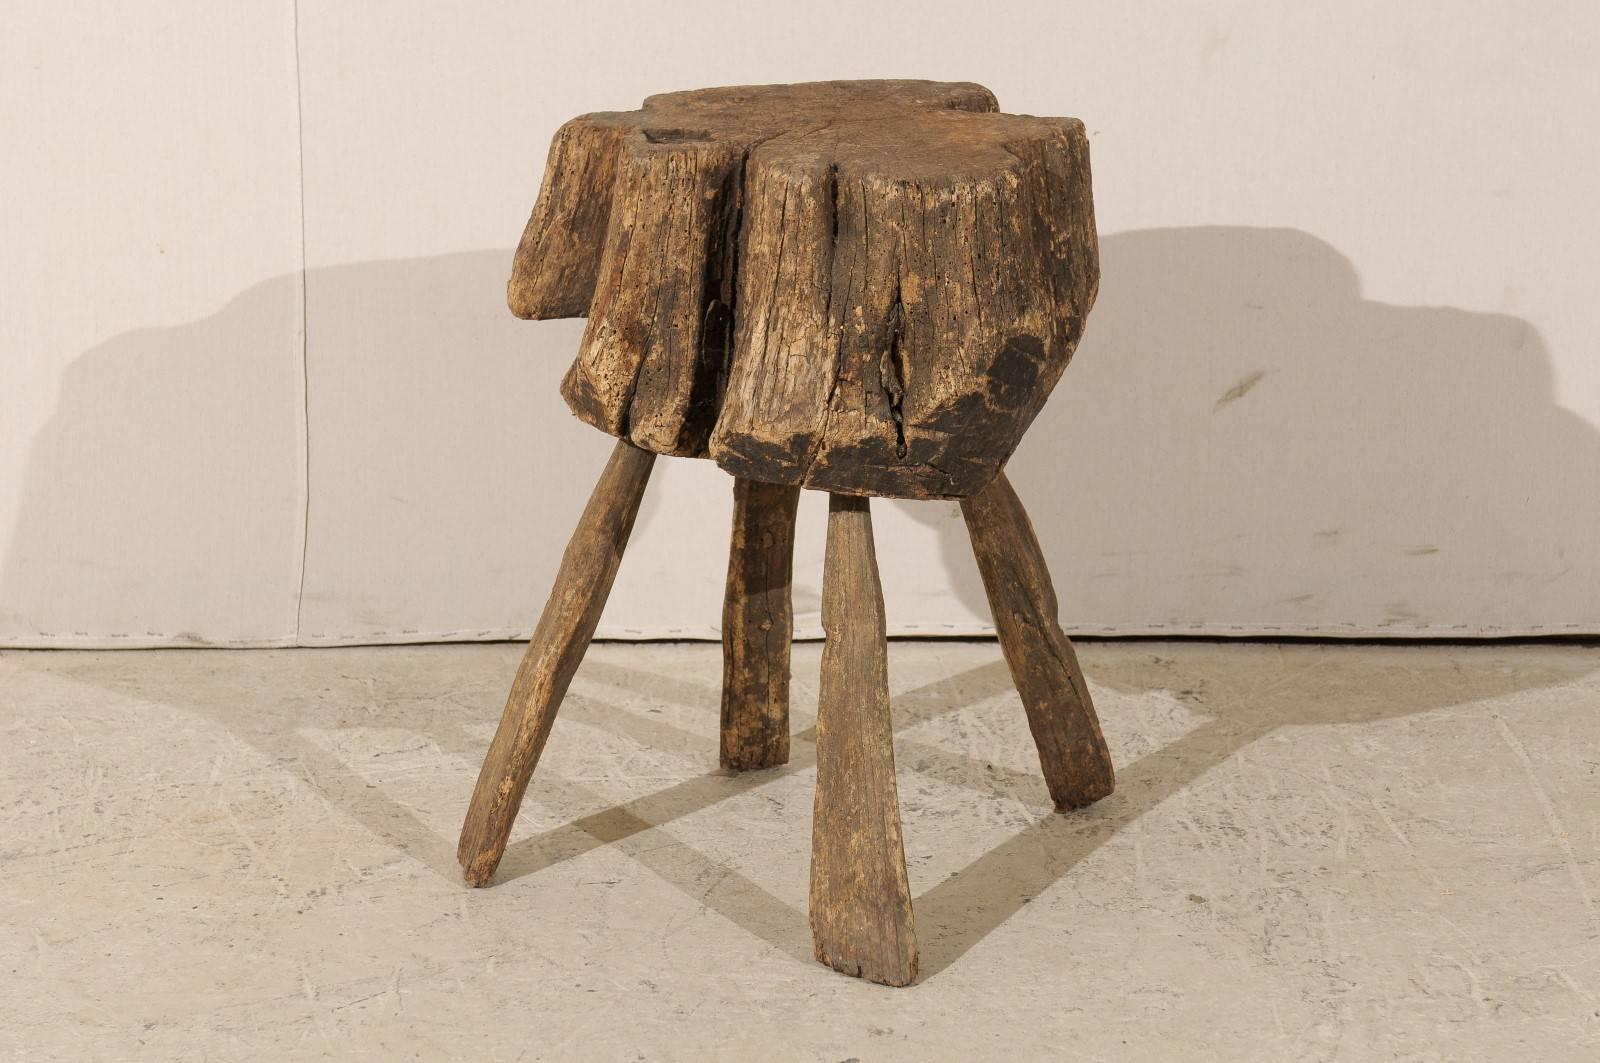 A rustic tree stump drink table. This tree stump drink table gives any space a touch of rustic nature and is also functional. Pull this table up to your chair and use it as a handy surface to rest a book or a beverage.